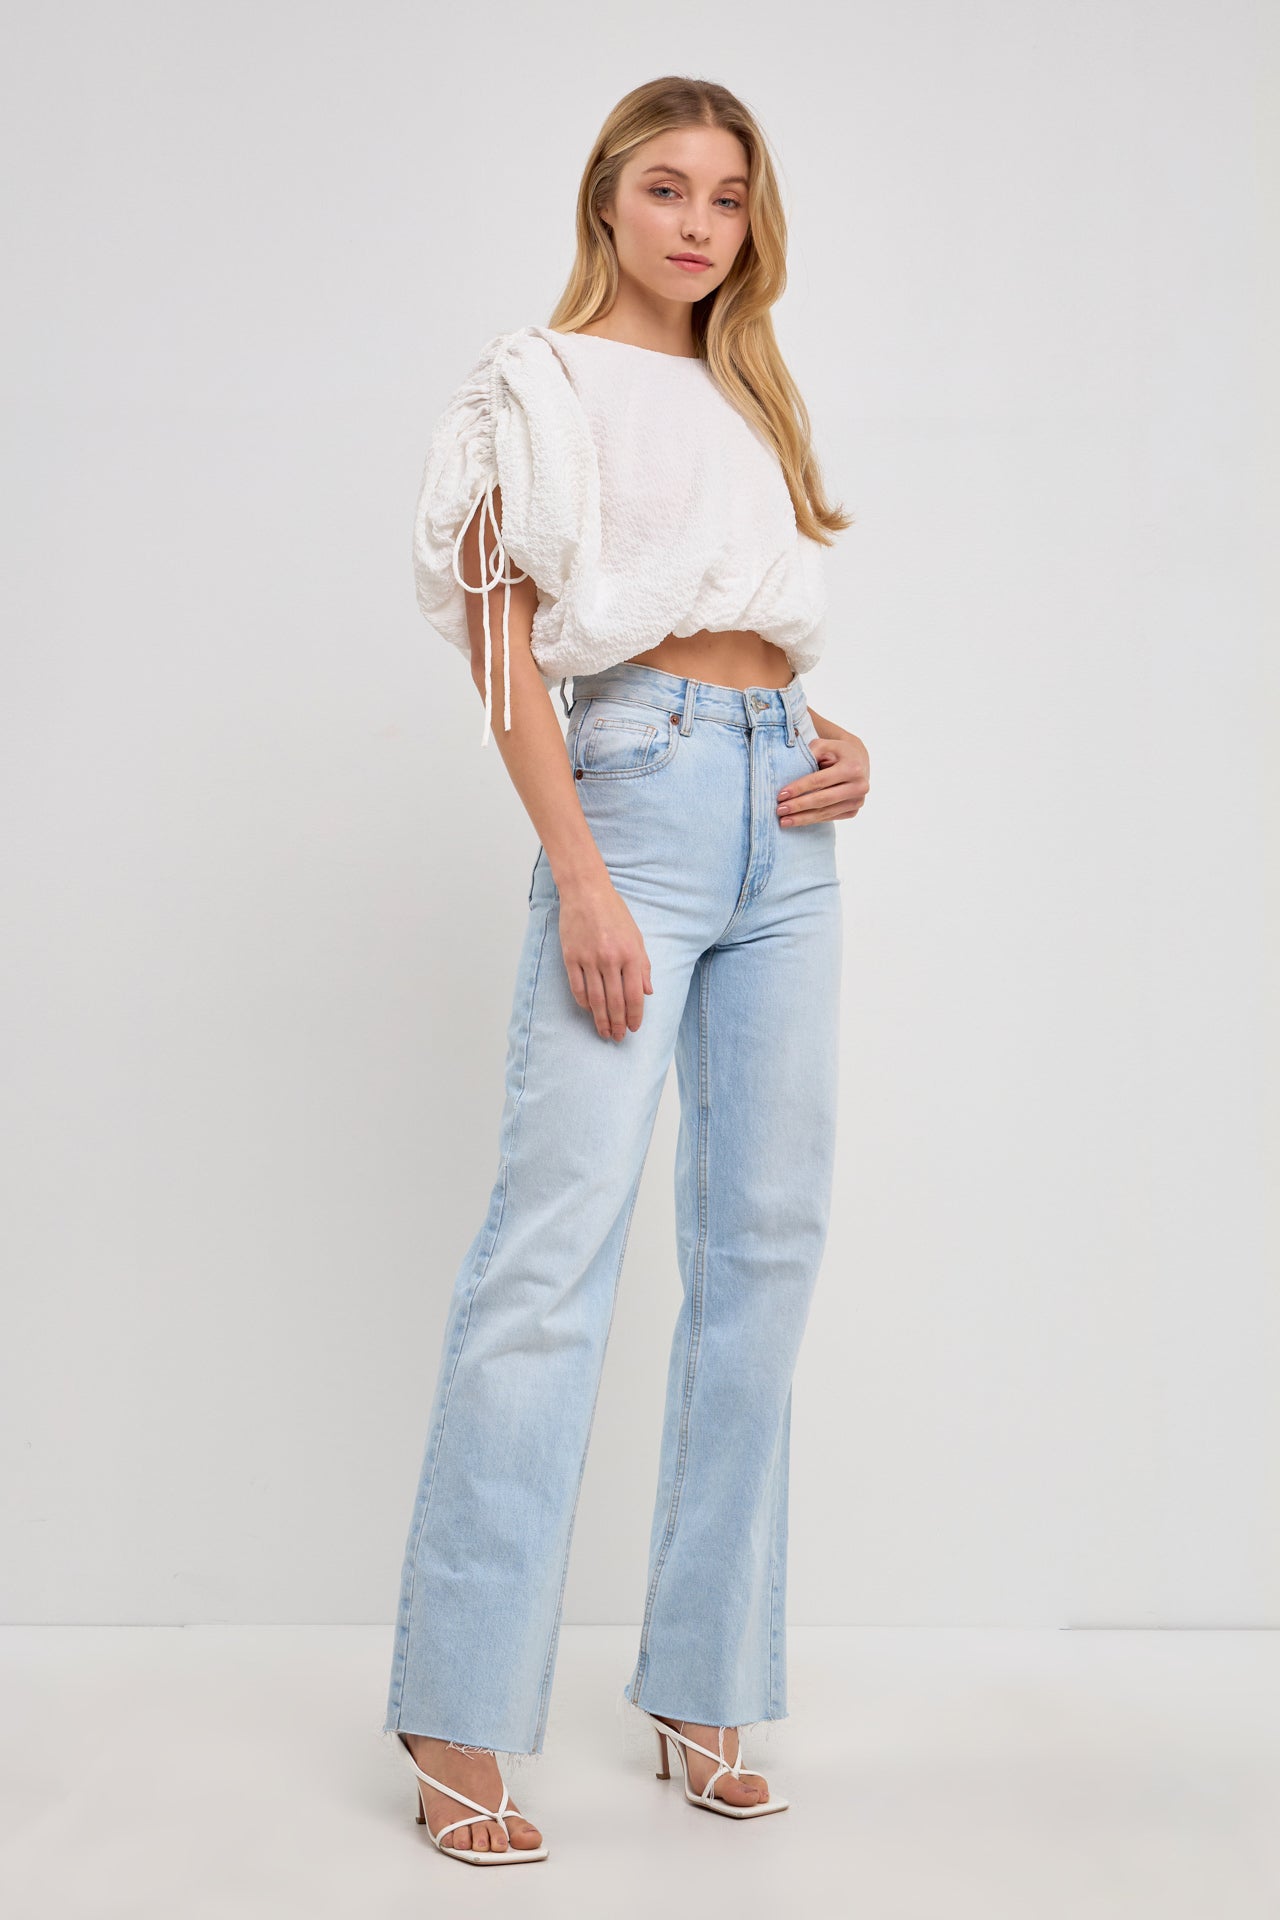 ENDLESS ROSE - Voluminous Cropped Top - TOPS available at Objectrare